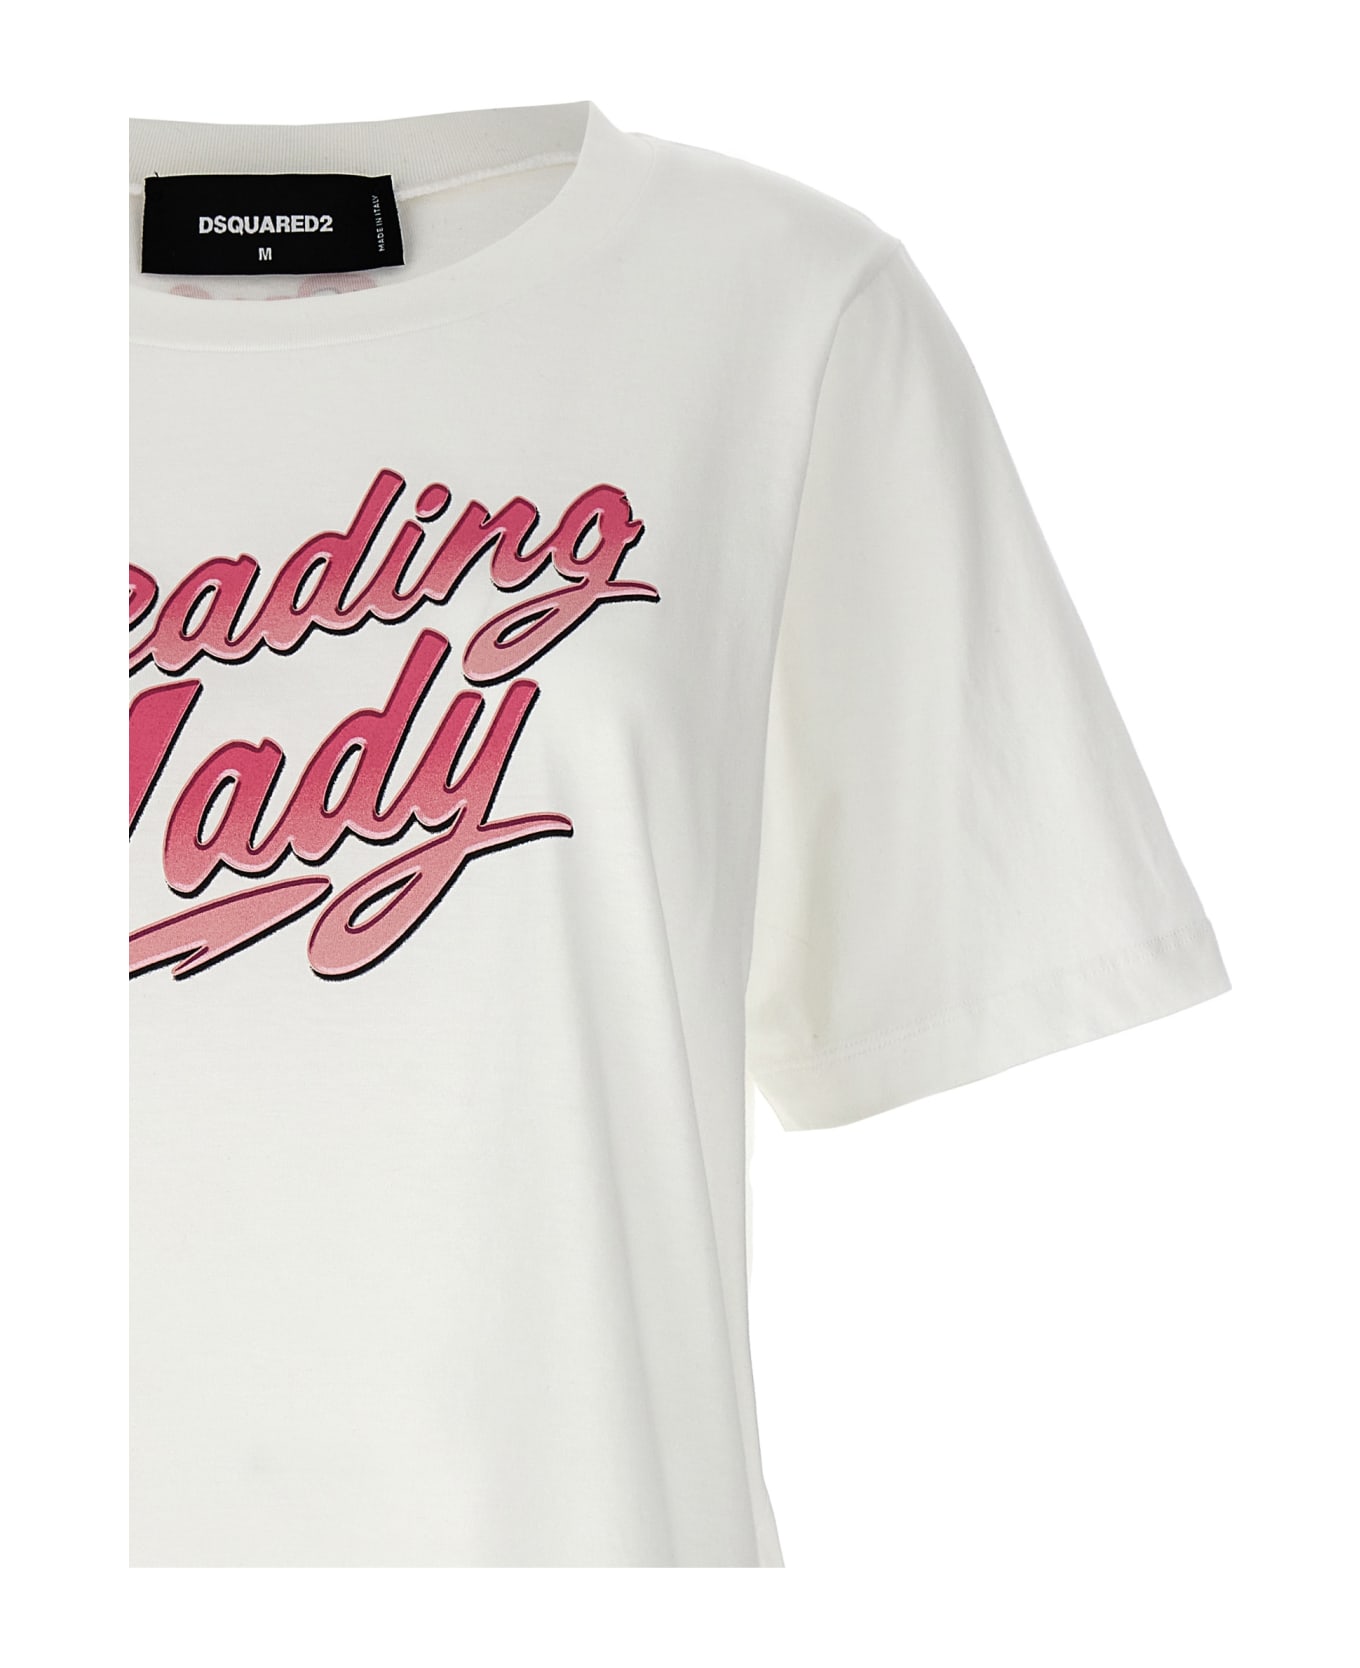 Dsquared2 Leading Lady T-shirt - White Tシャツ